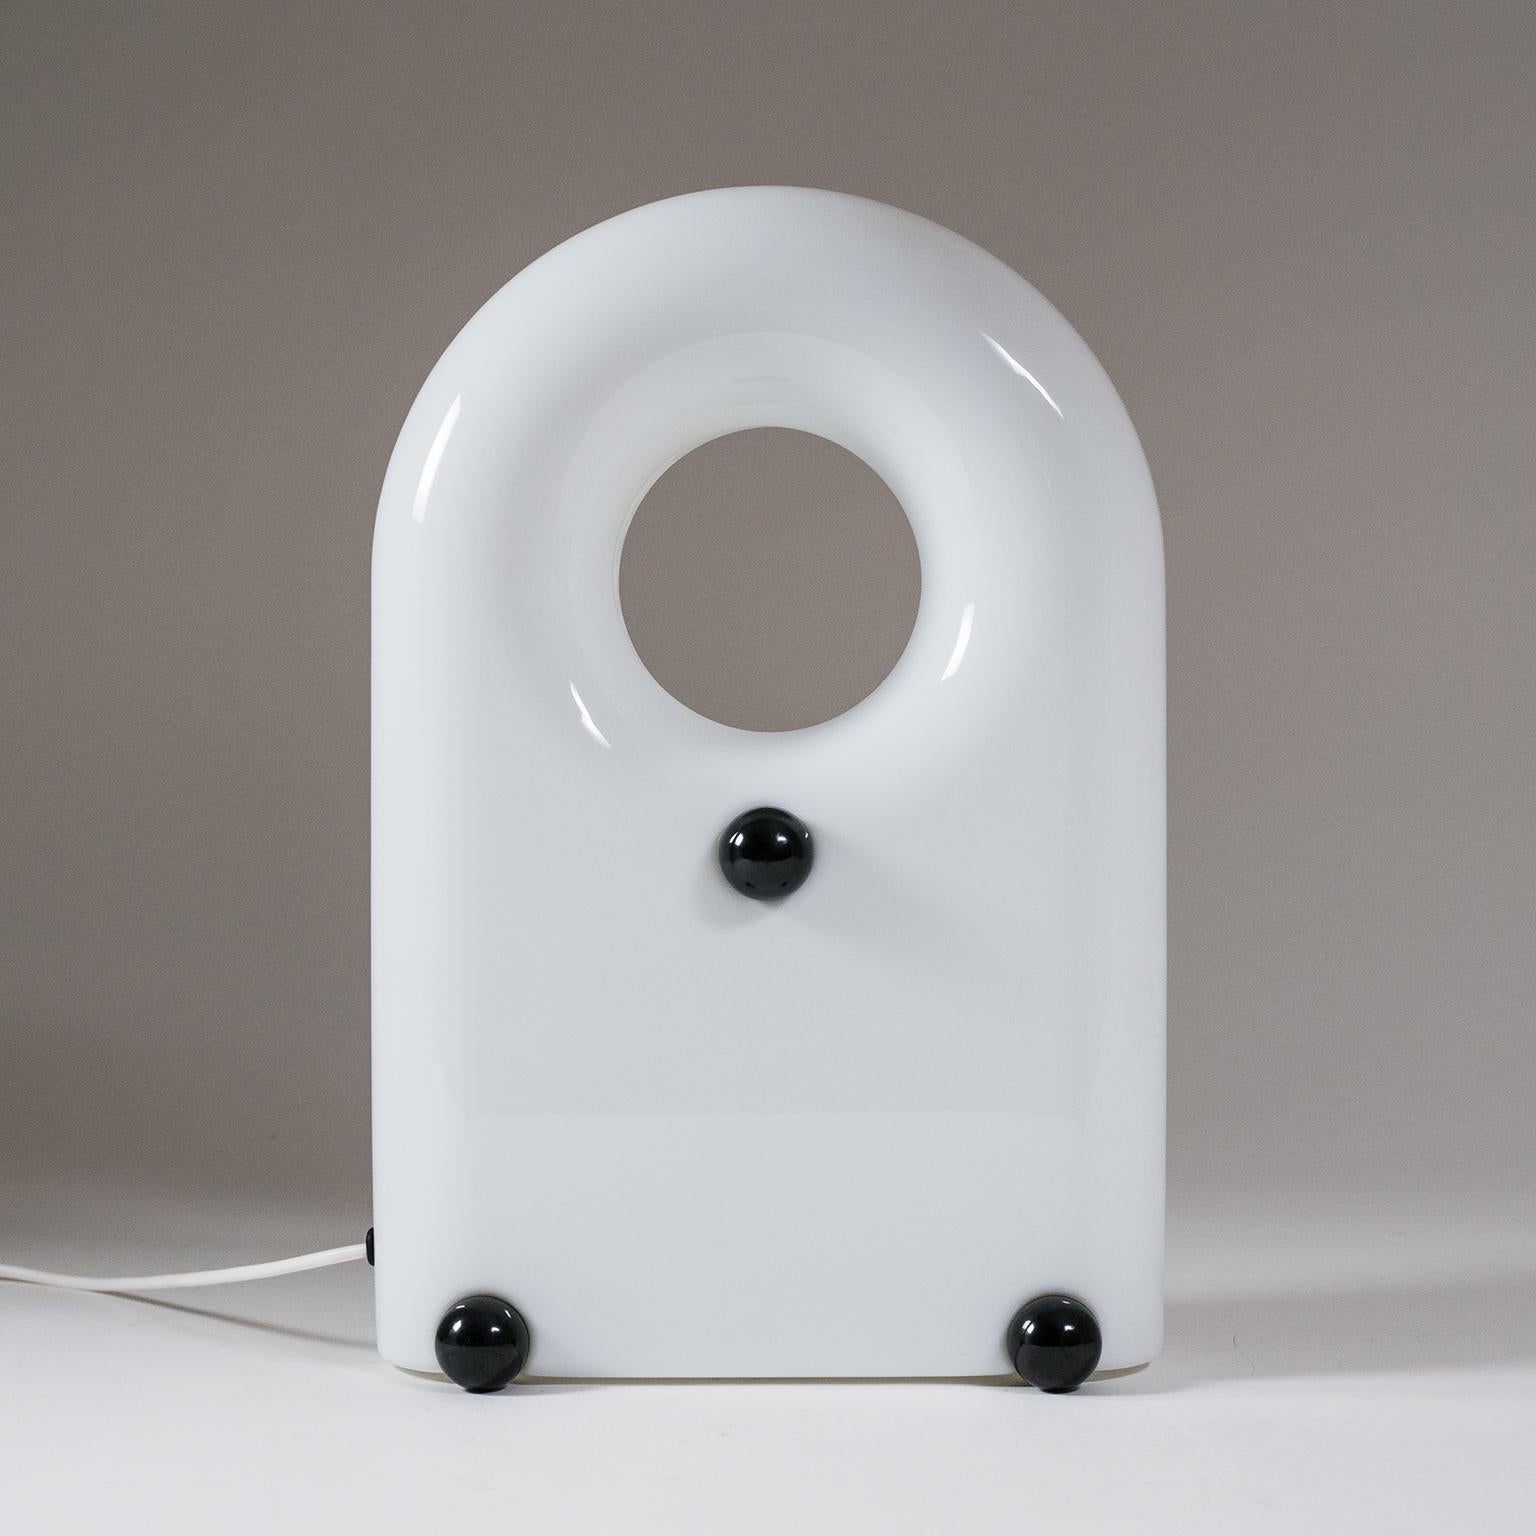 Sculptural Italian lamp from the 1960s. Made of white acrylic this can be used as a table lamp as well as a floor lamp. Its stylized 'bag'-shape with large handle invites for it to be moved around to where a very soft ambient light is required.